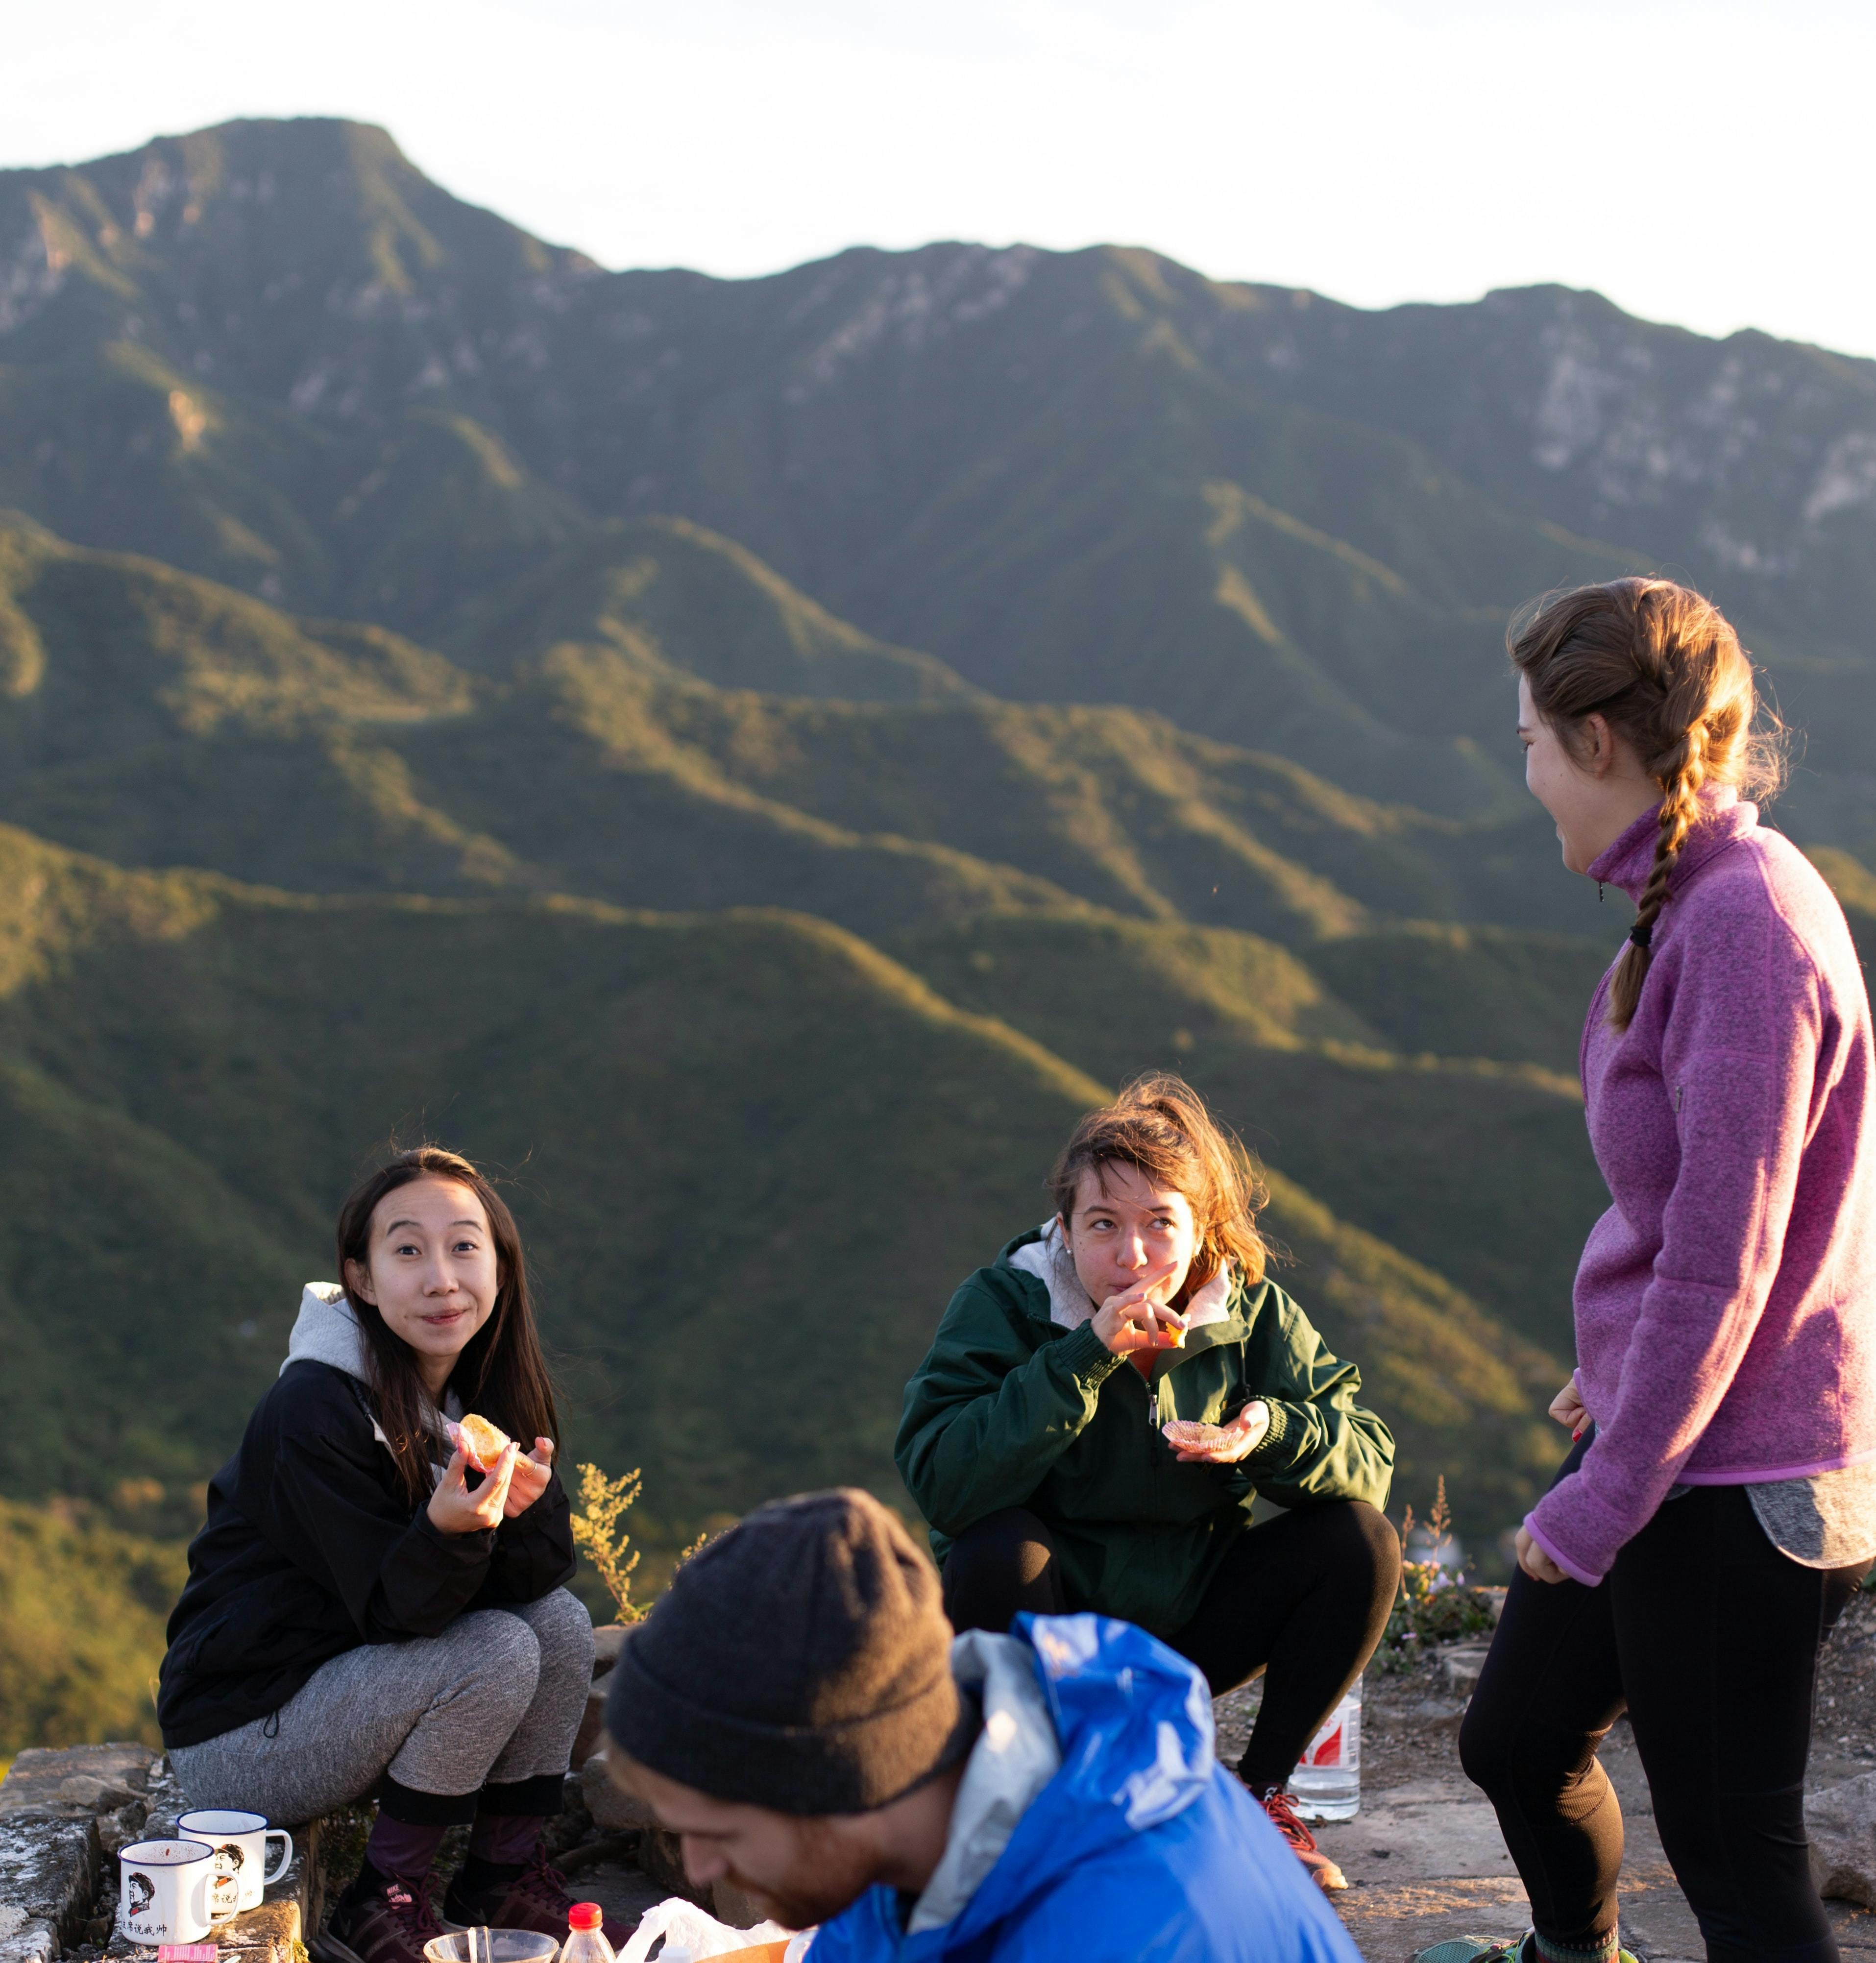 Four people outside eating with some mountains in the background.